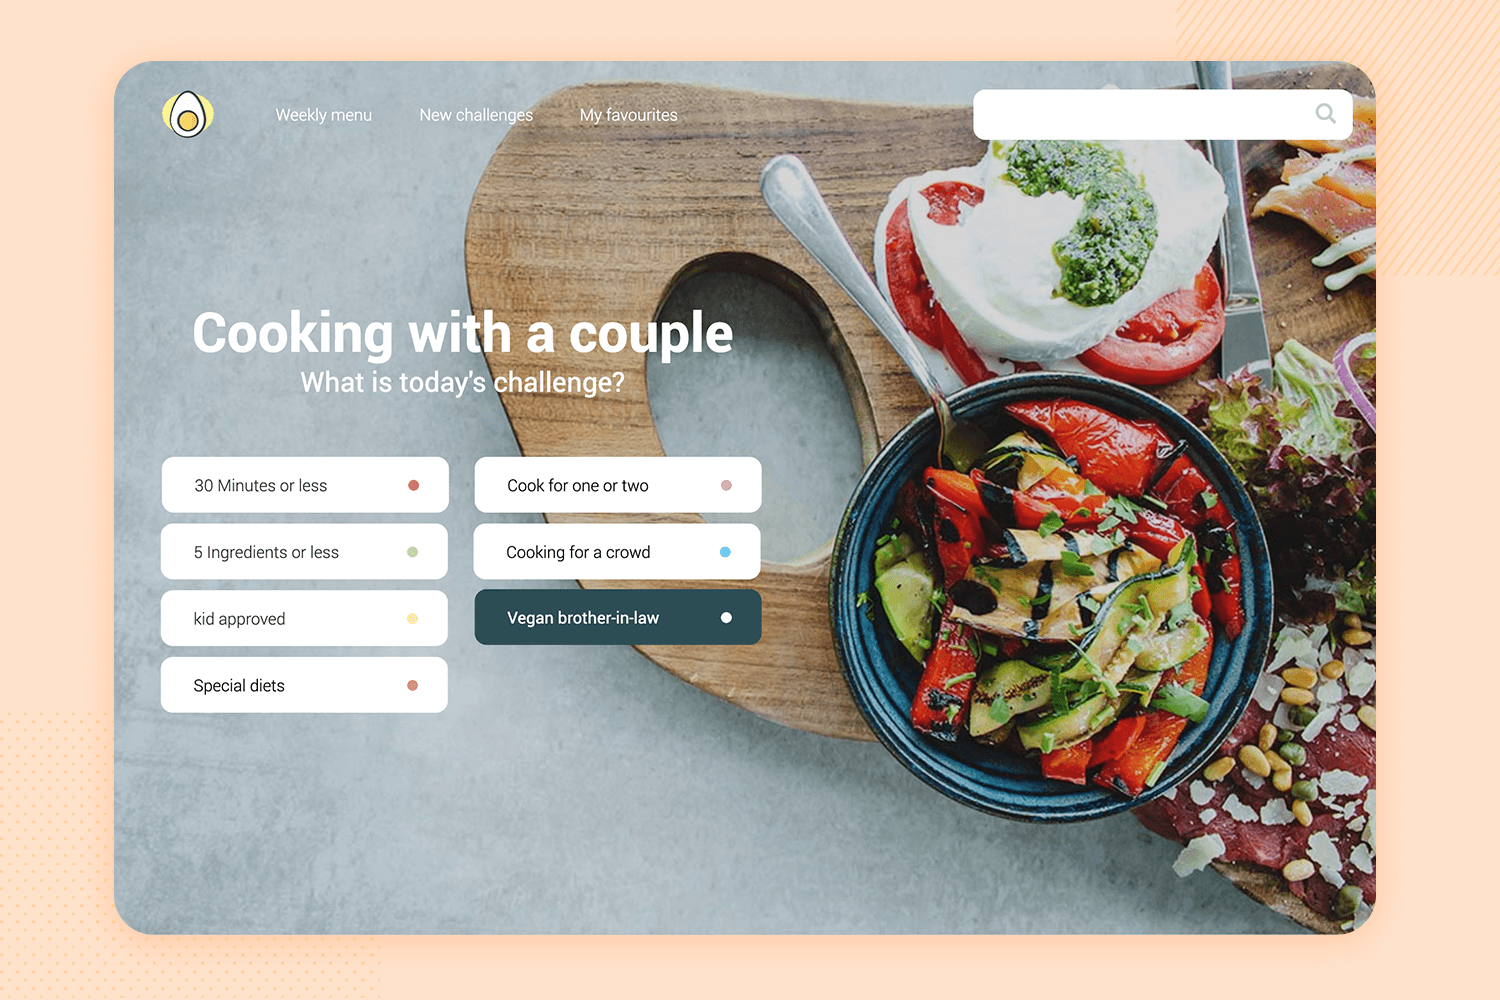 Cooking challenge app mockup. Shows meal categories like quick recipes, cooking for two, and special diets. Helps users pick daily cooking challenges